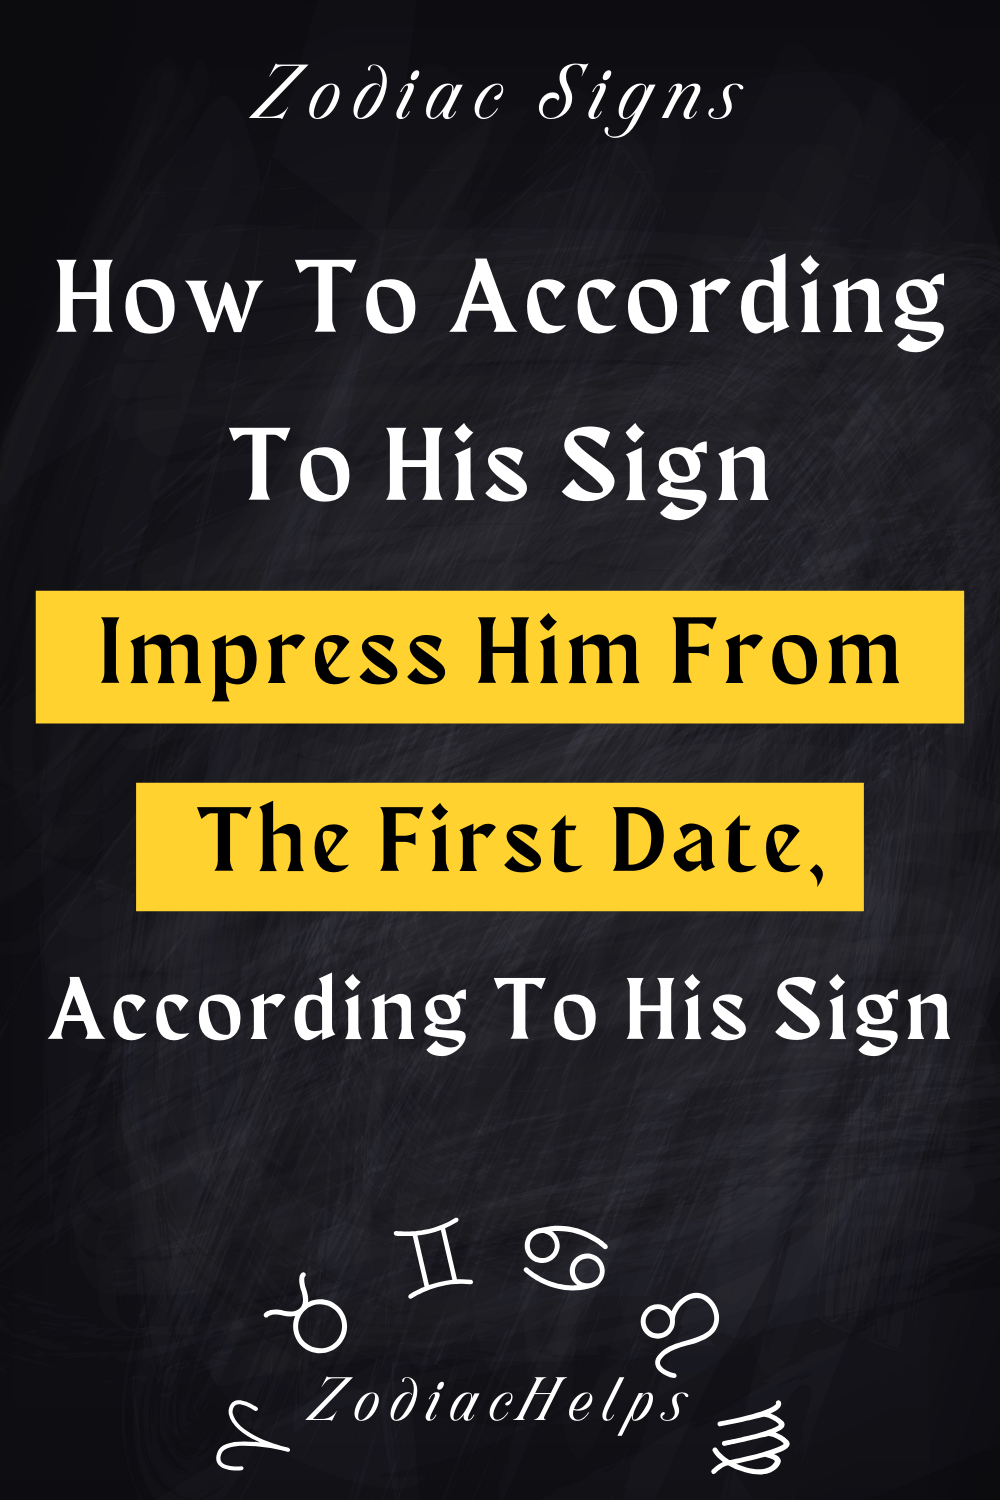 How To Impress Him From The First Date, According To His Sign